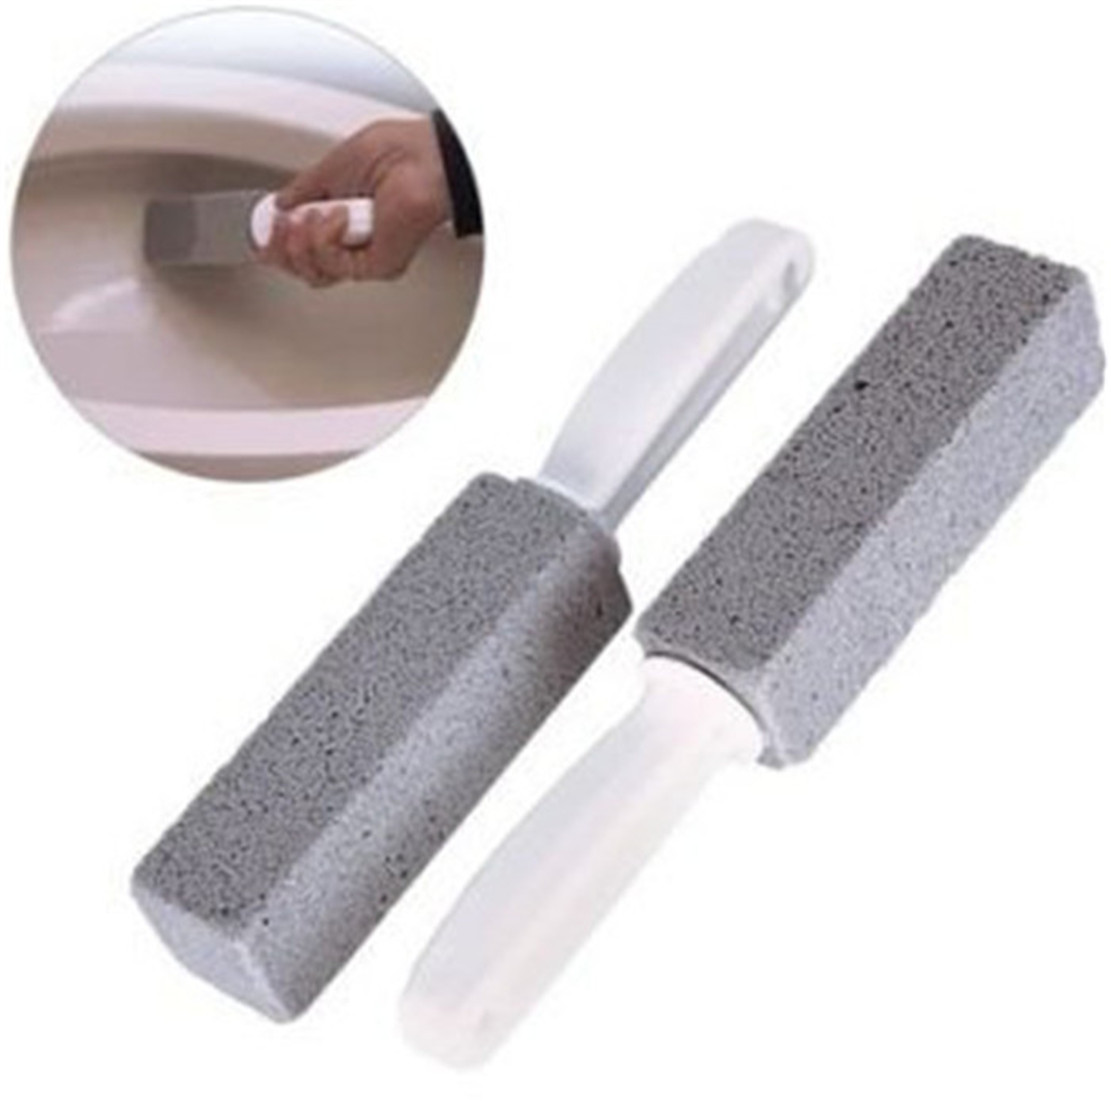 Pumice Scouring and Cleaning Stick